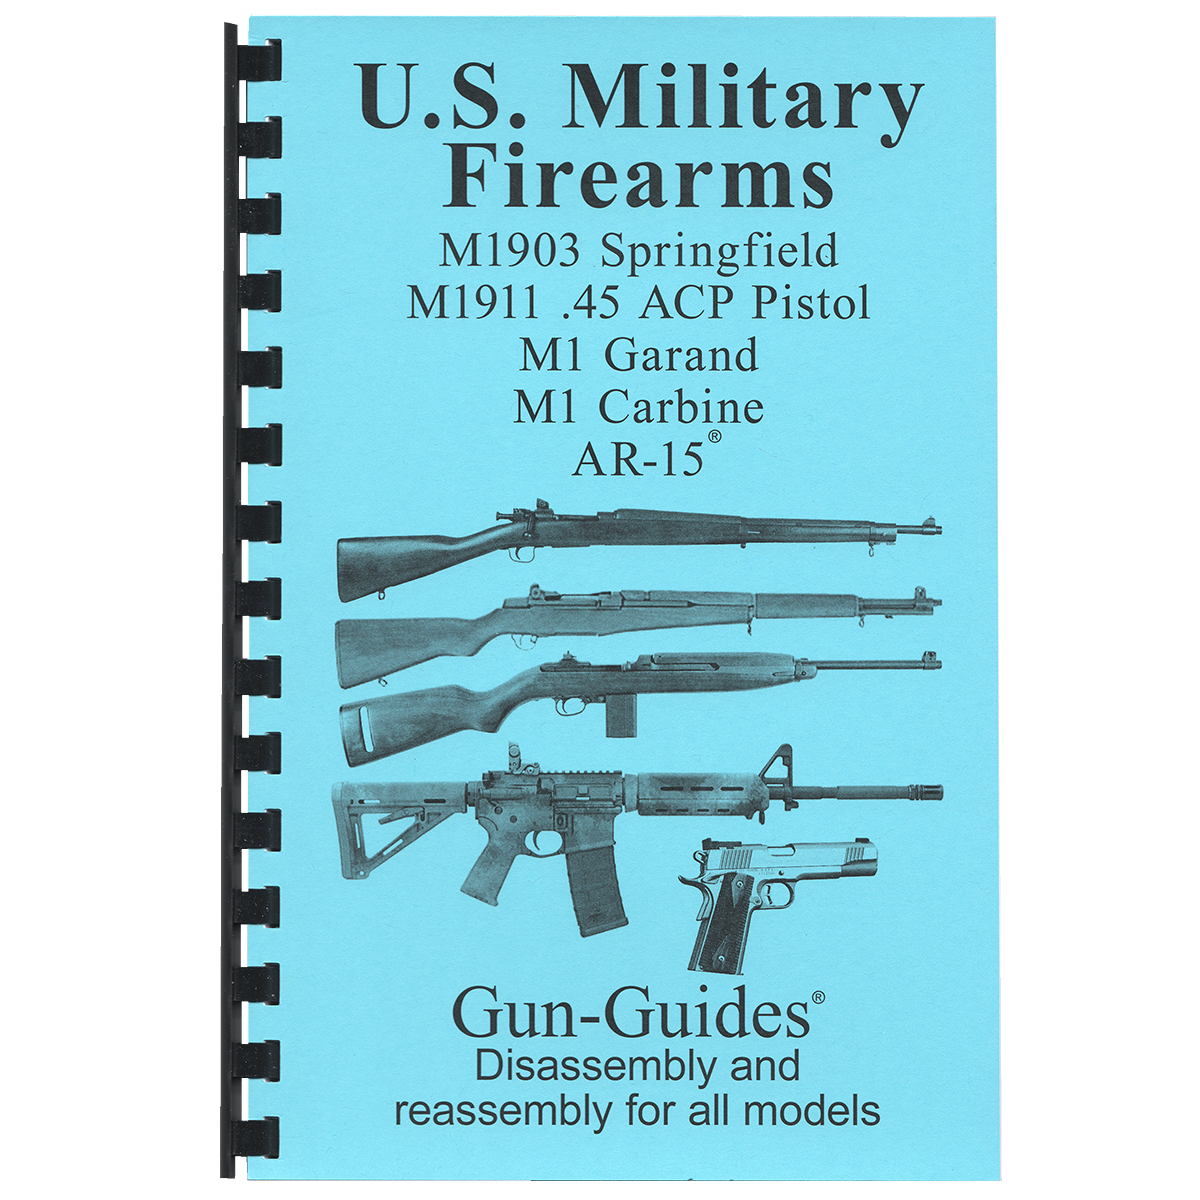 U.S. Military Firearms- Compilation of 5 Gun-Guides®